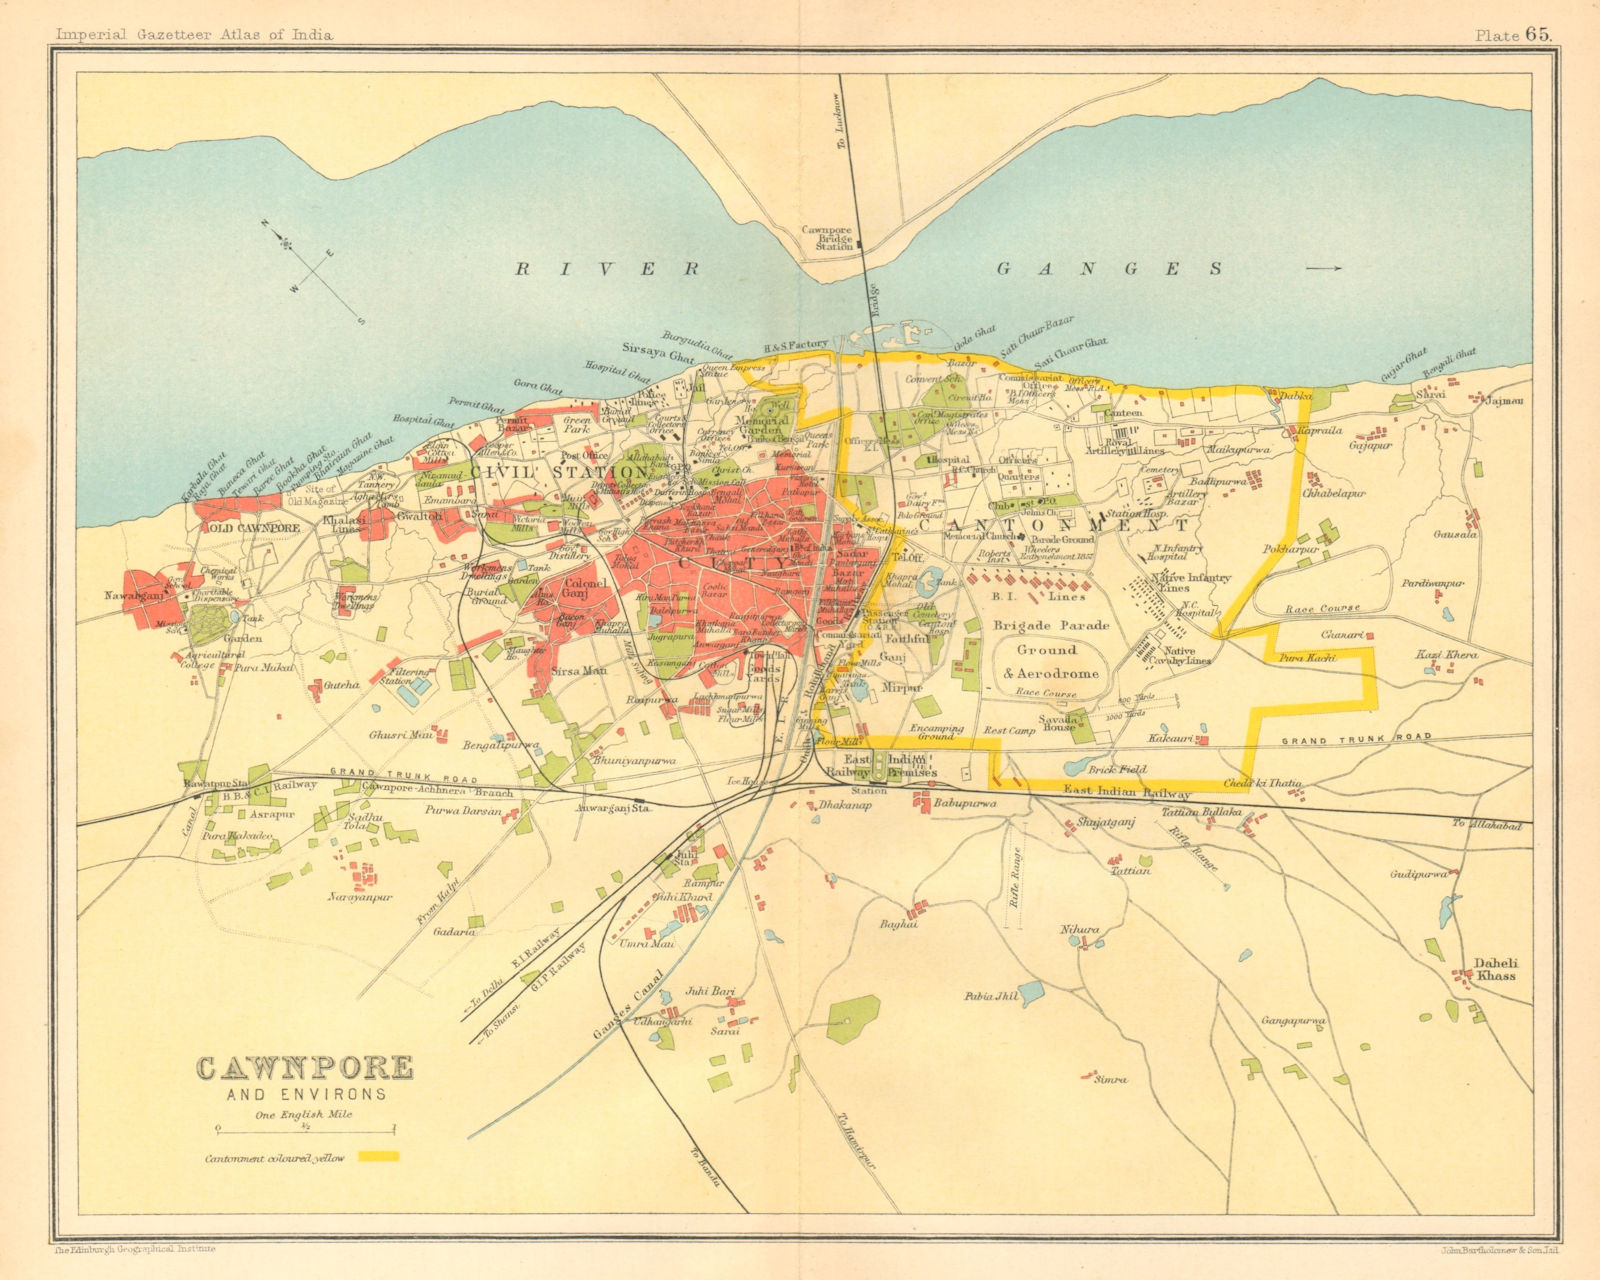 Cawnpore/Kanpur town city plan. Key buildings Cantonment. British India 1931 map